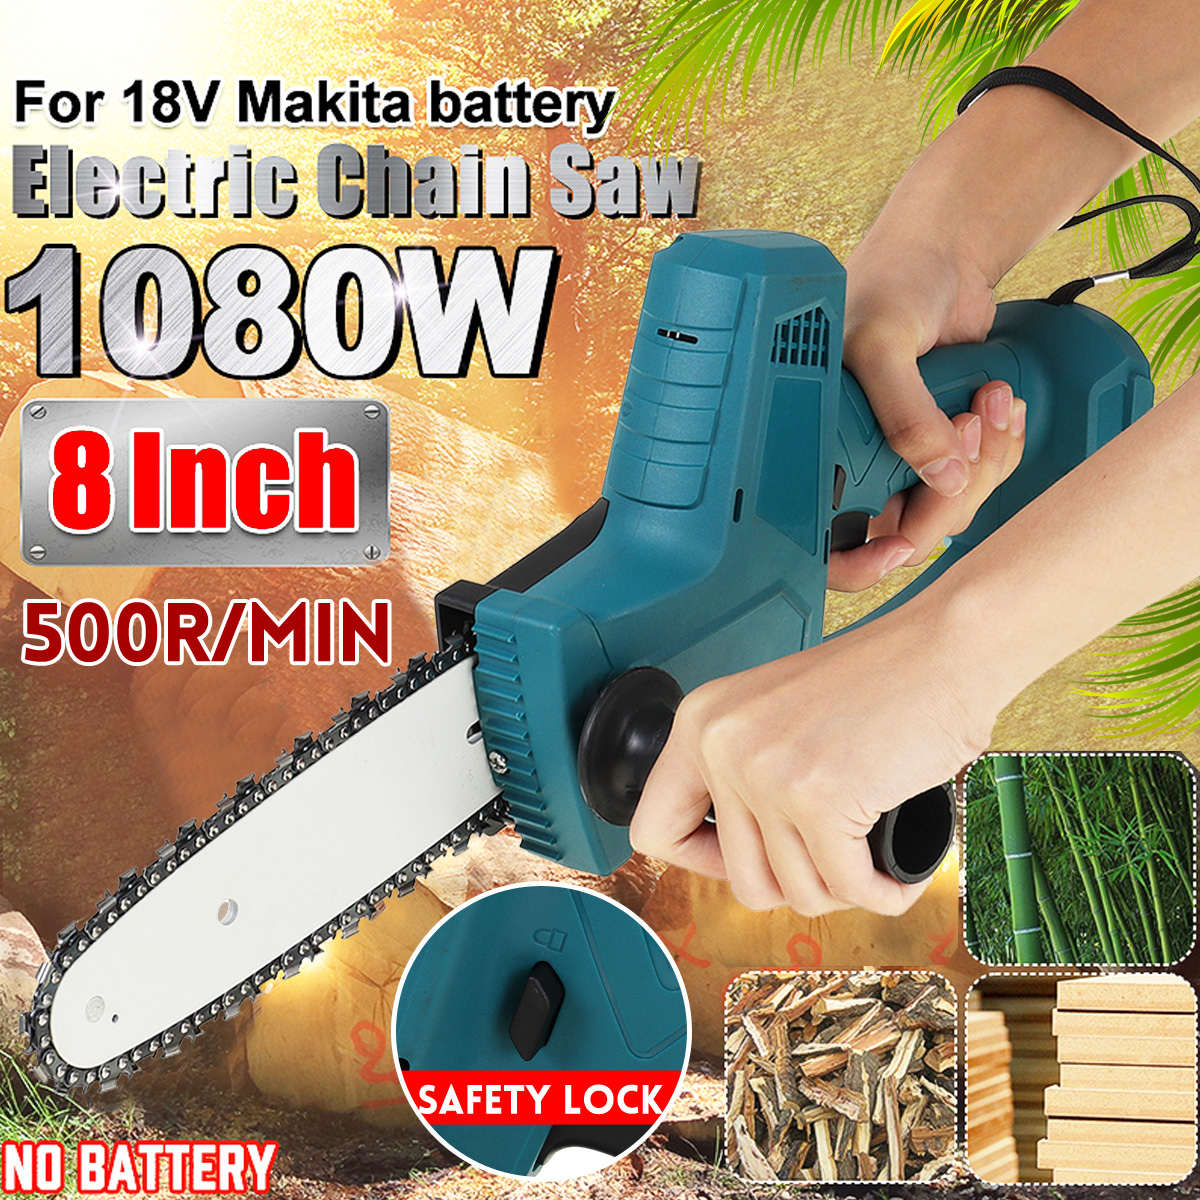 1080W-8-Inch-500rmin-Electric-Chain-Saw-Wood-Cutter-For-Makita-18V-Battery-1733330-1